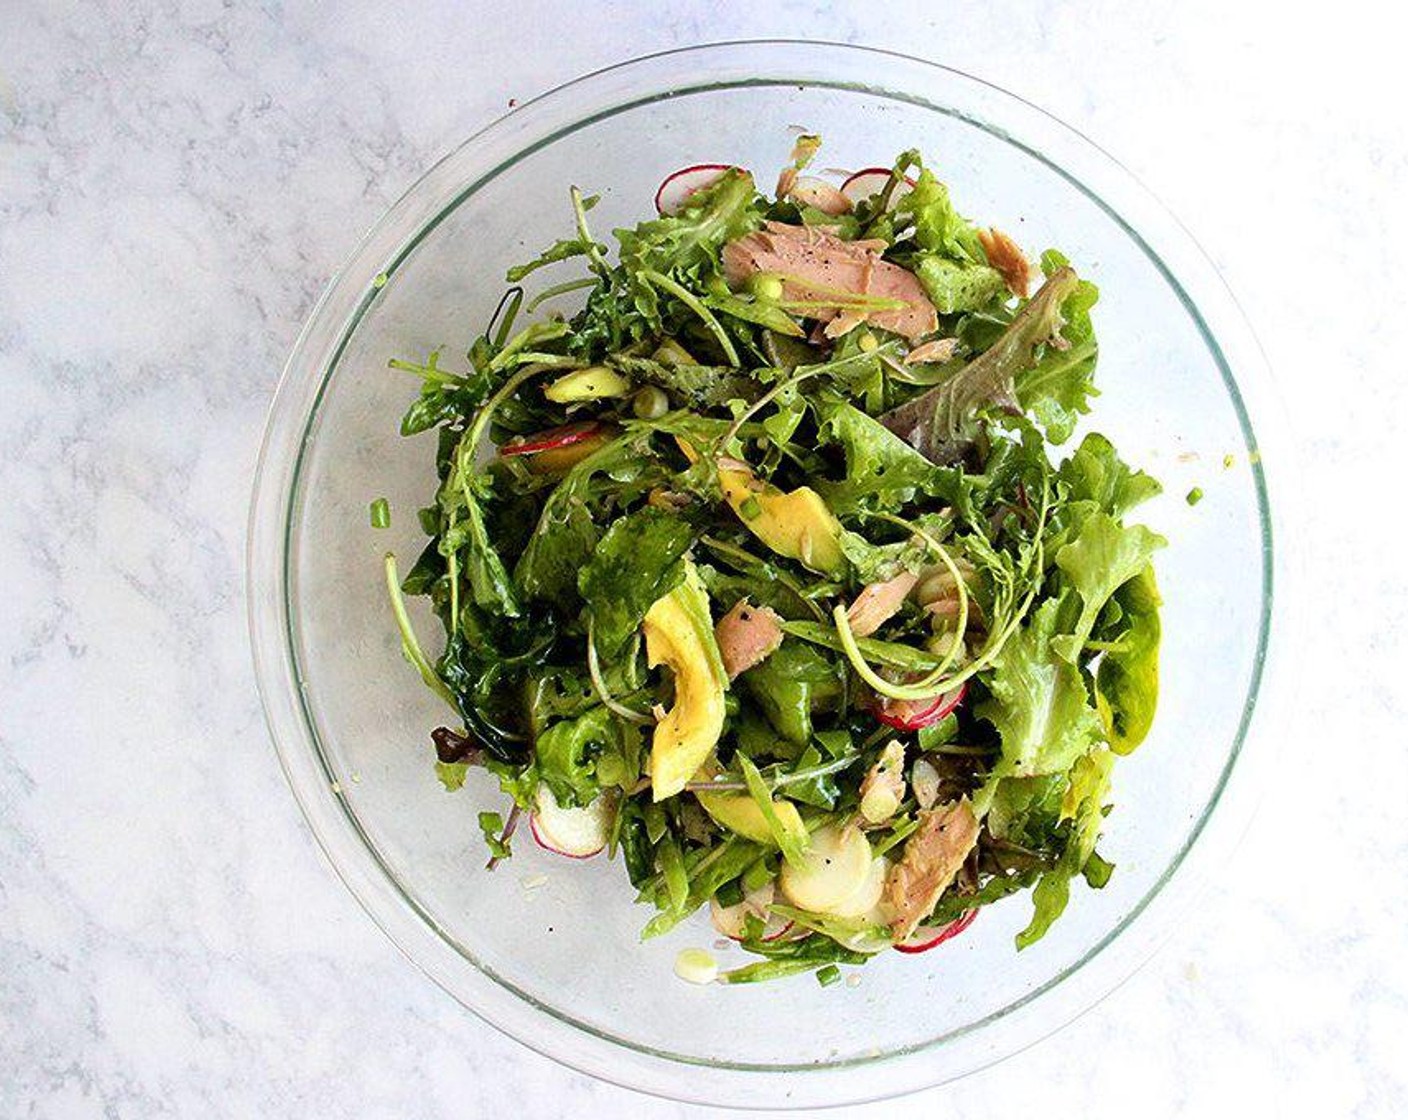 step 2 Place the Lettuce (to taste), Radish (1 bunch), Turnip (1), Snow Peas (1 bunch), Scallion (1 bunch), and Canned Tuna (1 can) in a large bowl. Pour over vinaigrette to taste. Season with Freshly Ground Black Pepper (1 dash) to taste. Toss gently and serve.